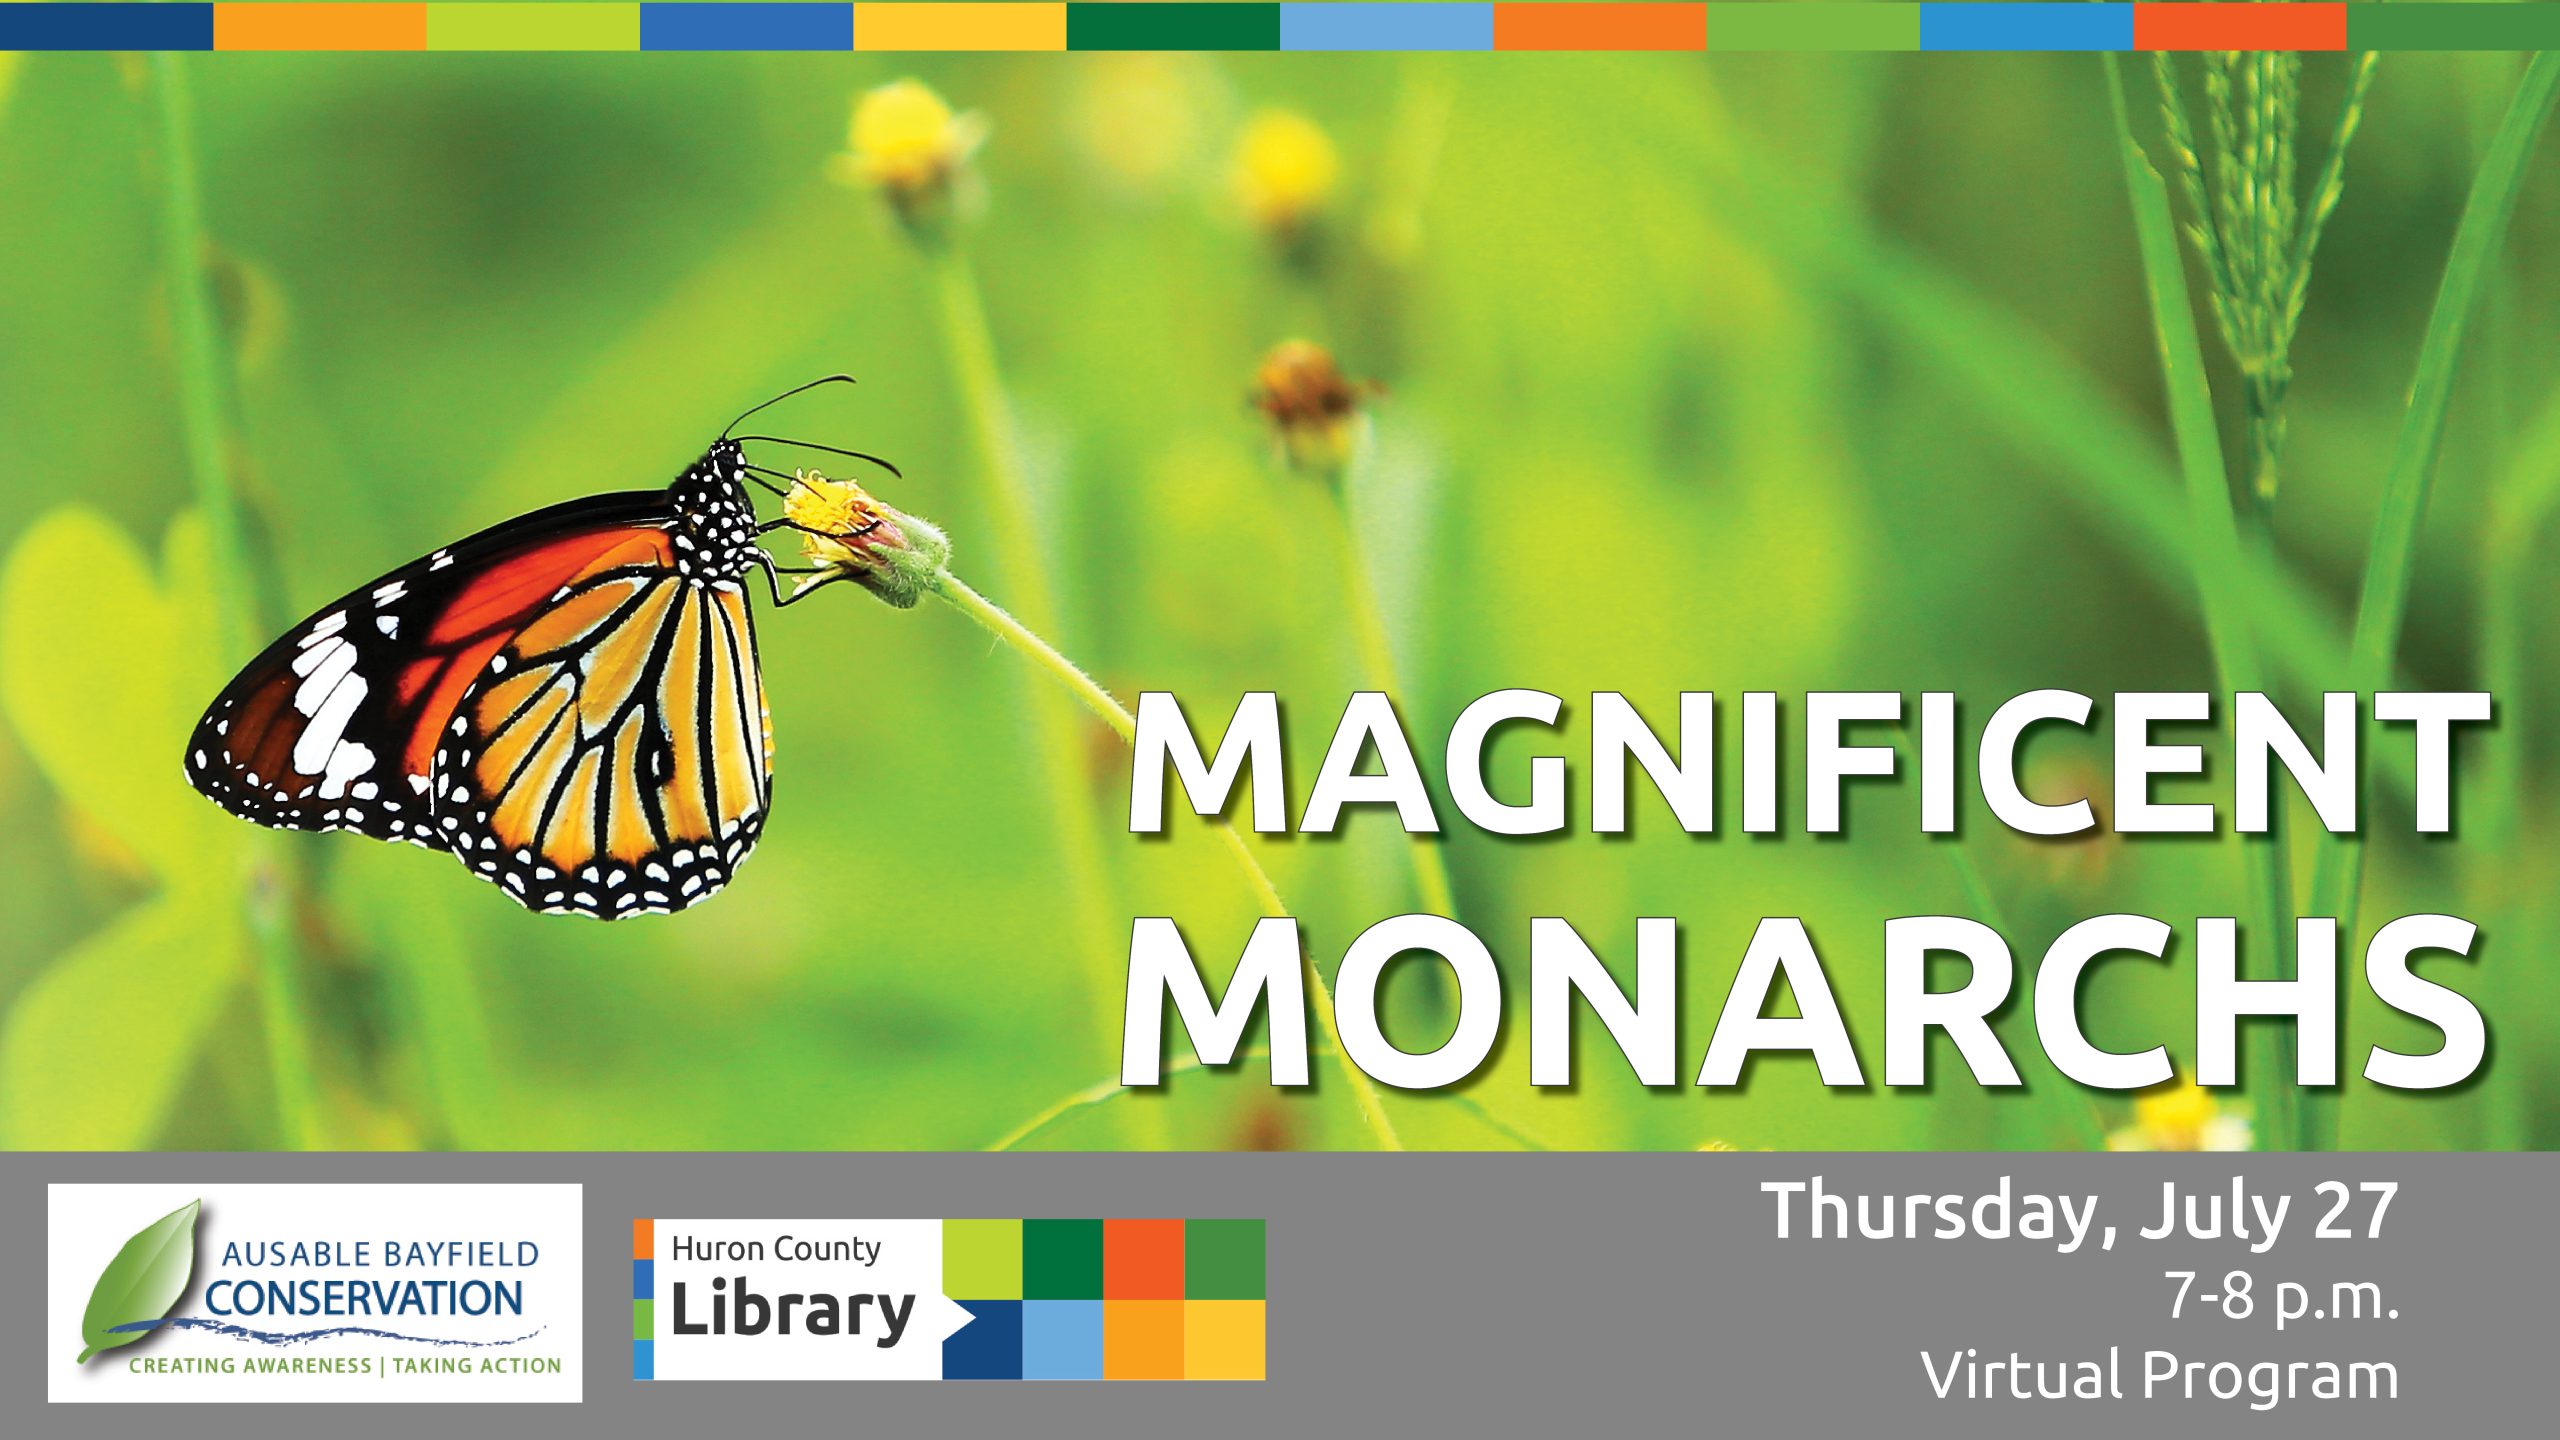 Image of a Monarch Butterfly on a flower with text promoting virtual Magnificent Monarchs program